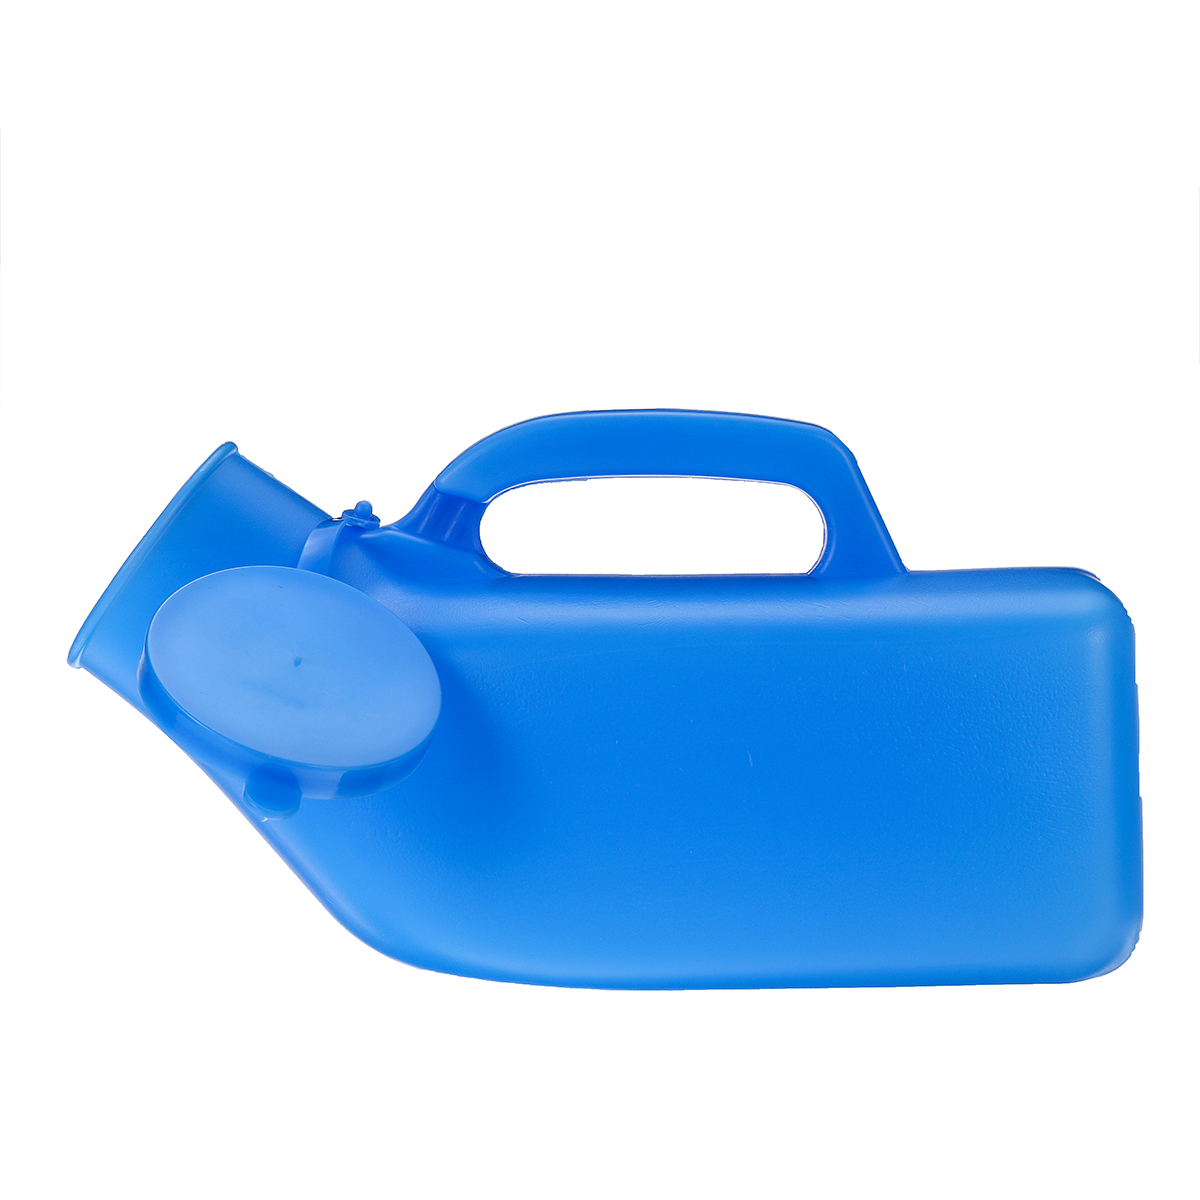 1200ML-Portable-Urinal-Handheld-Urinal-Thickened-Plastic-Urinal-Outdoor-Medical-Men-And-Women-Availa-1857146-9